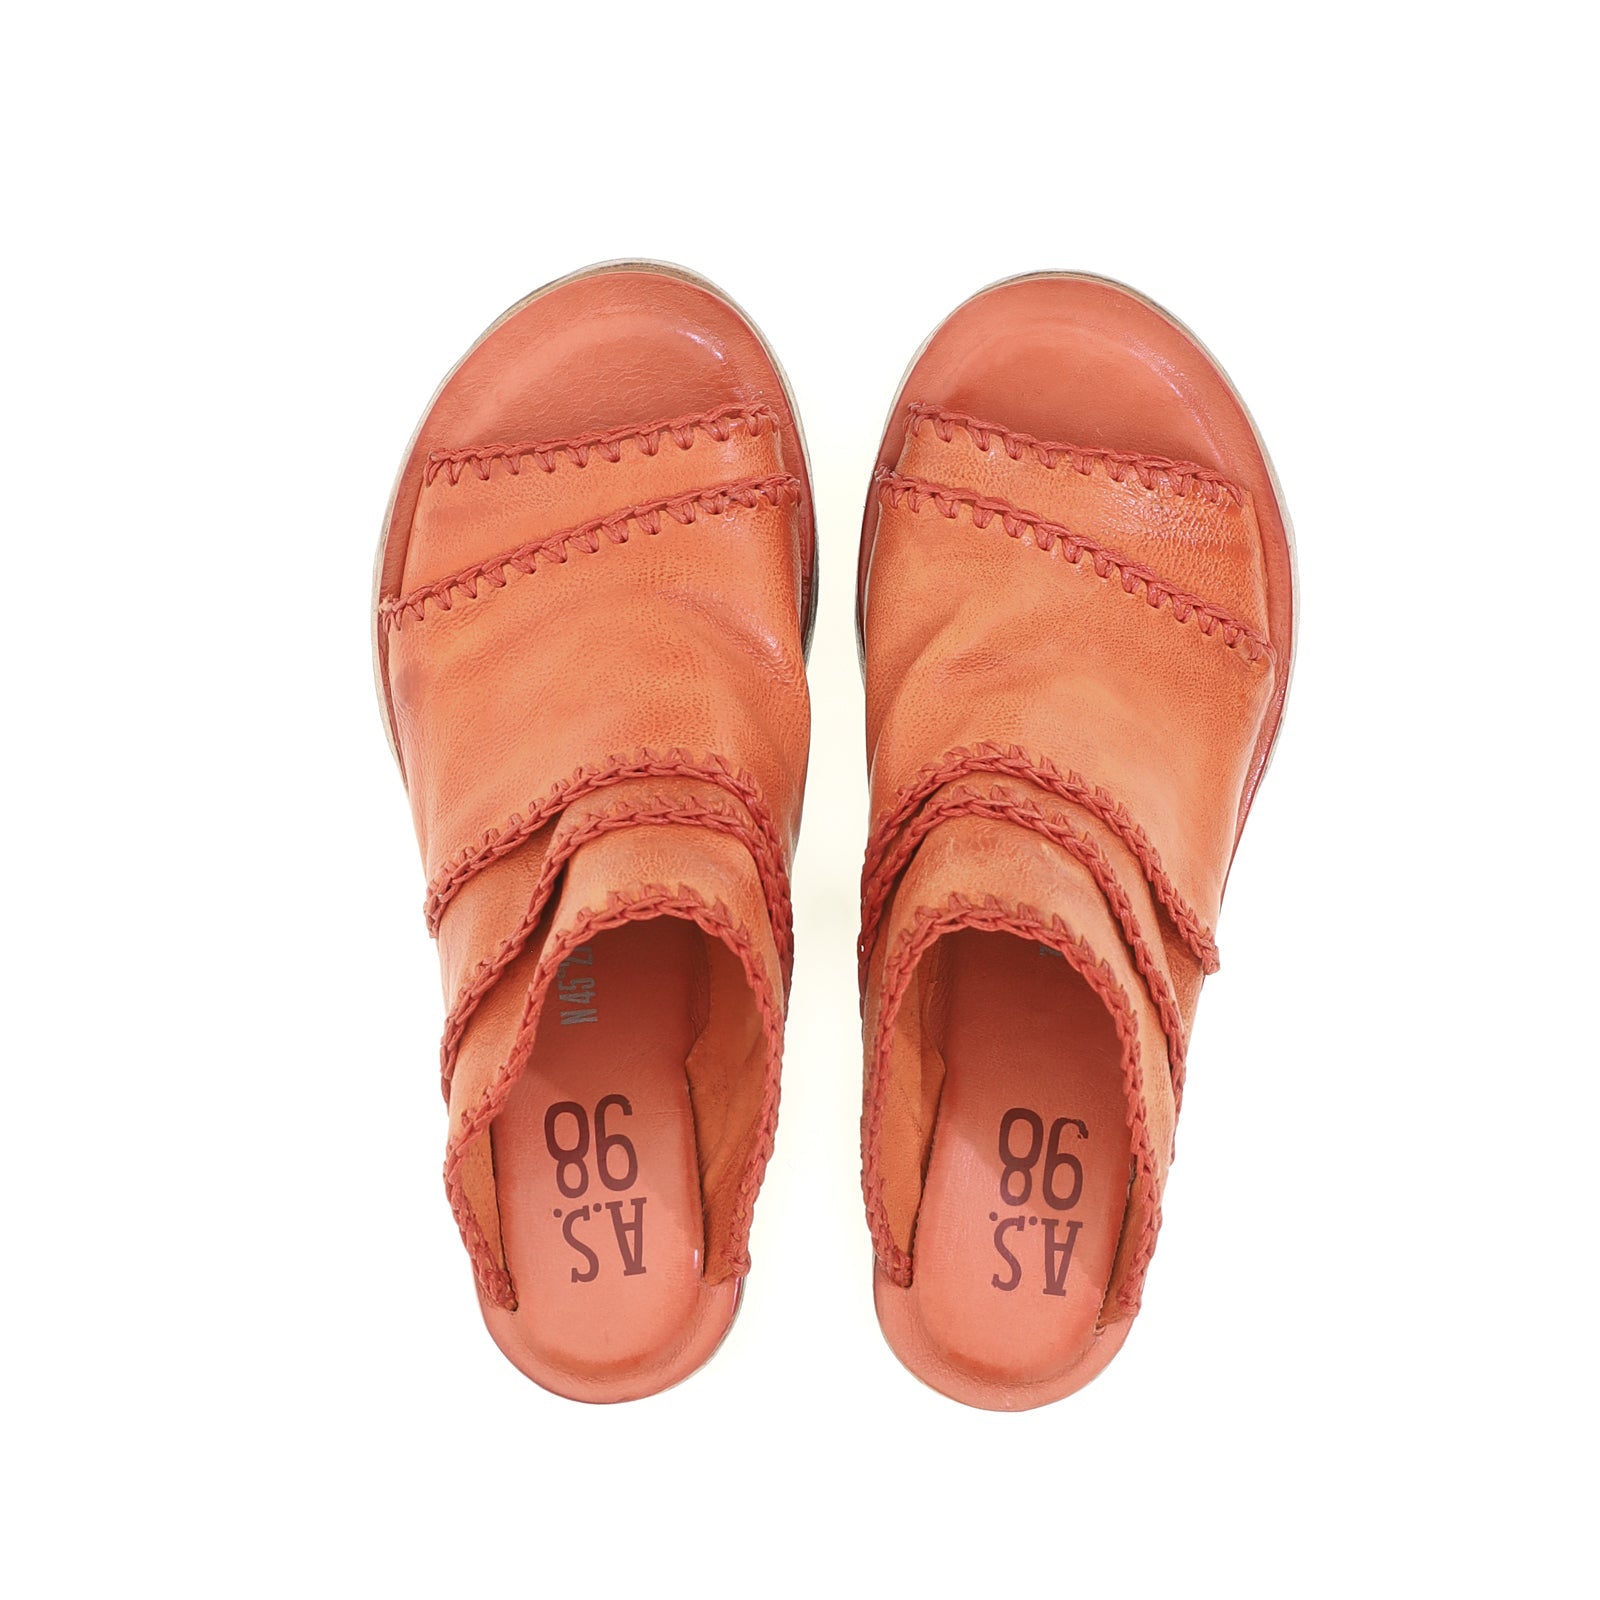 A.S.98 - nelson - Wedge - Sandal